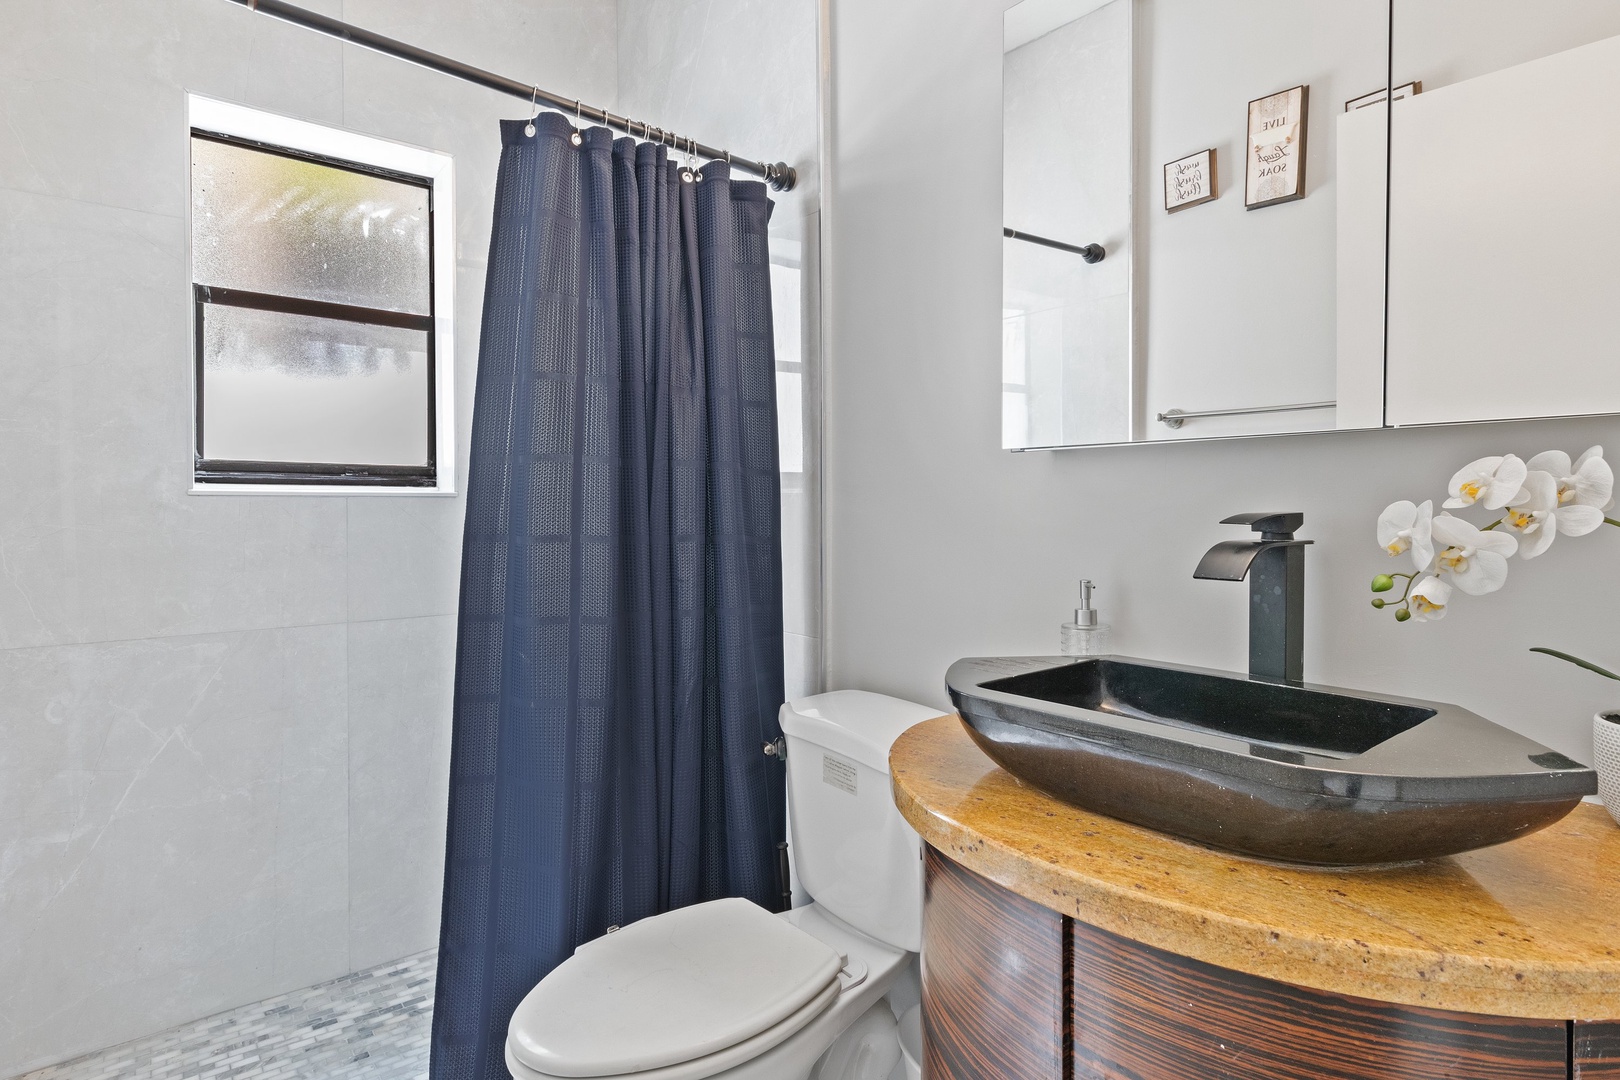 A chic vanity & shower await in the sophisticated full bathroom